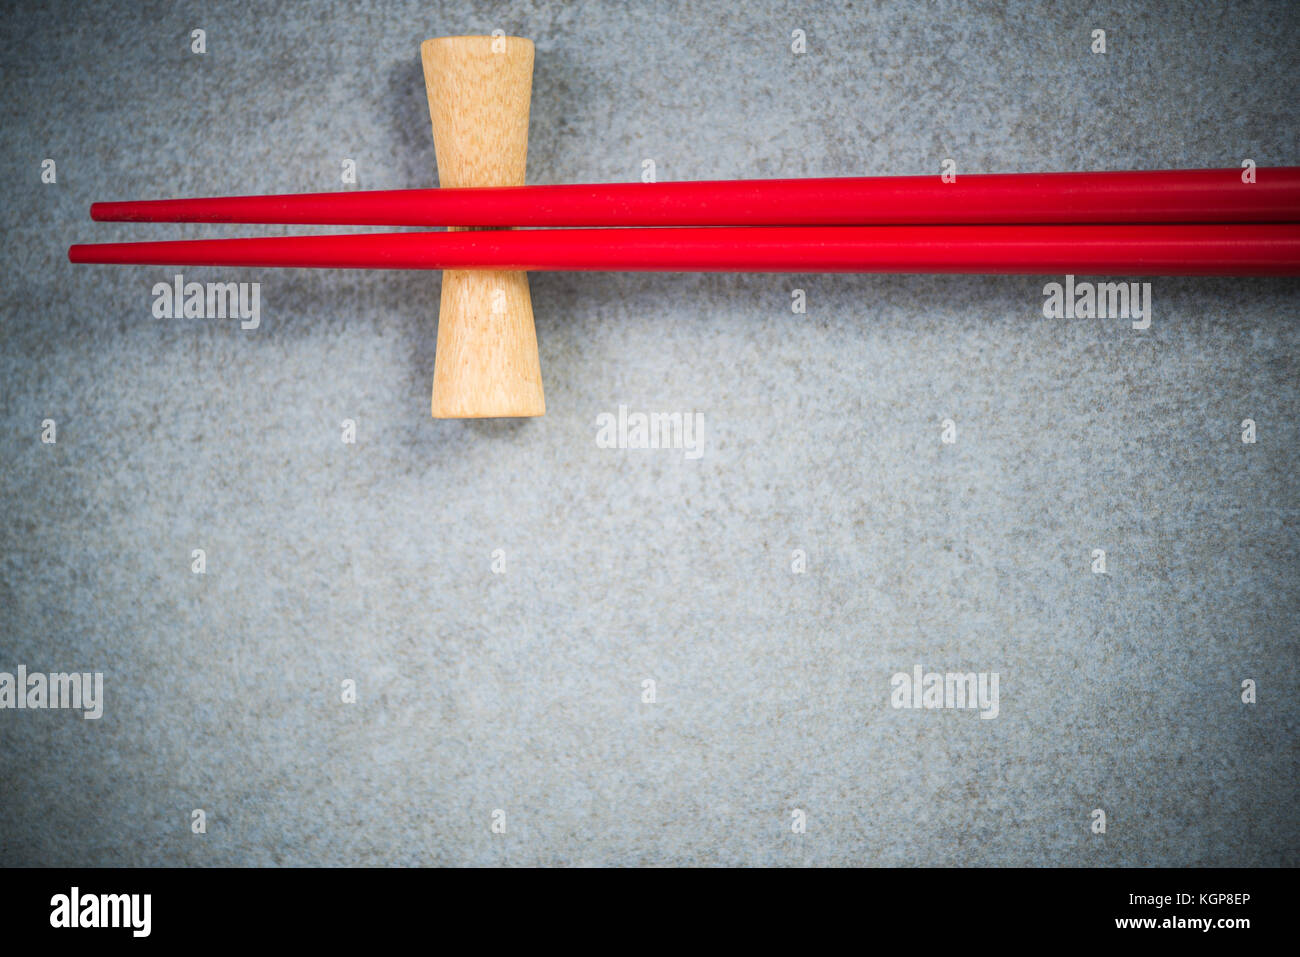 Japanese or asian cuisine food background. Stock Photo